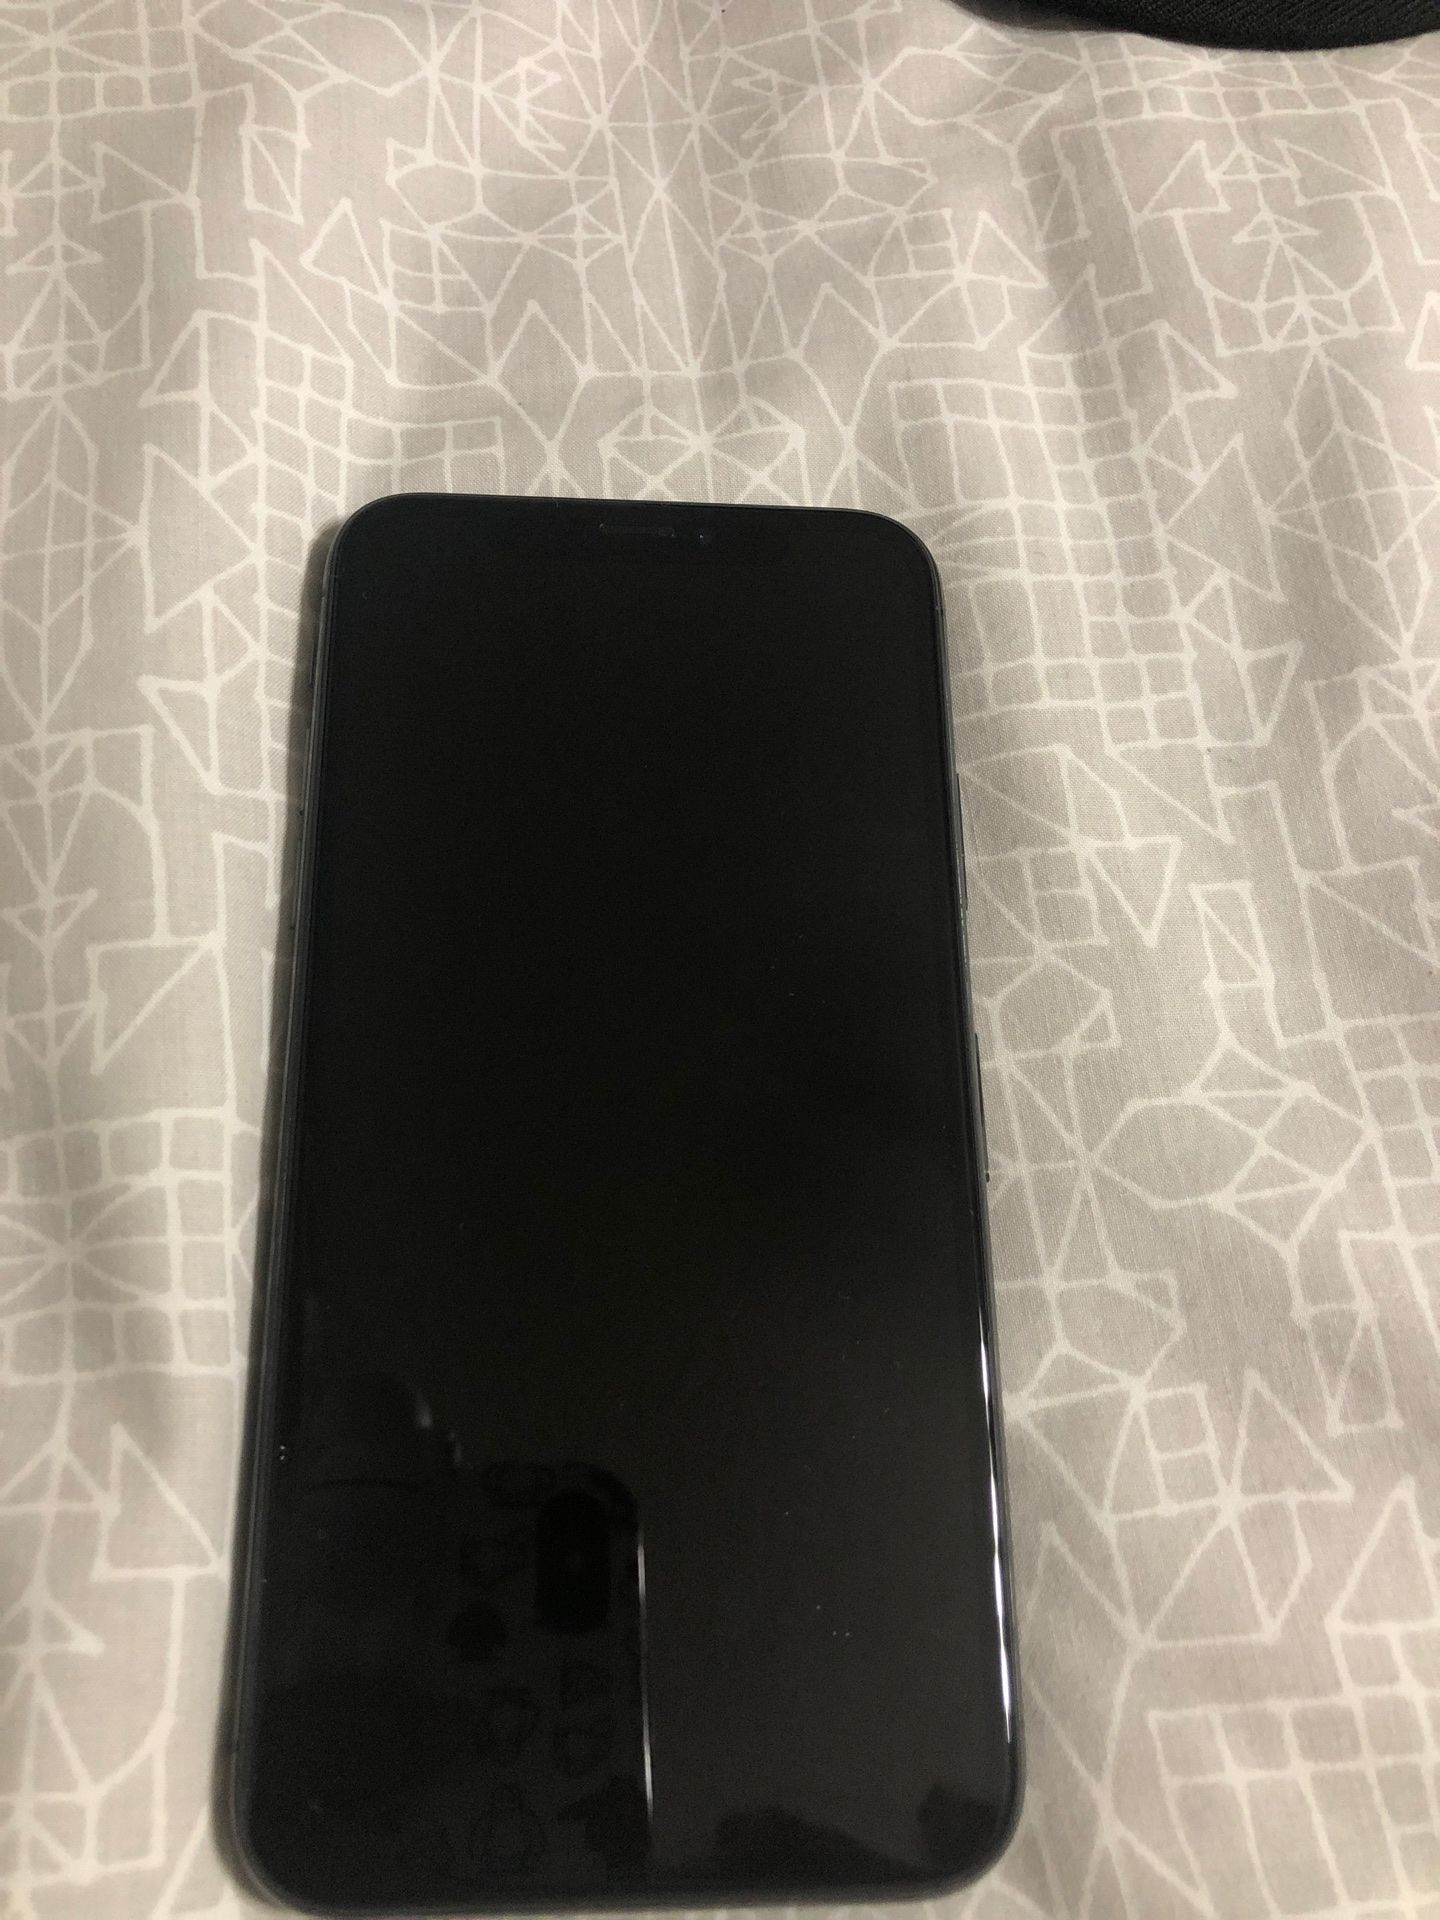 Apple iPhone X 64 gb Unlocked Excellent Condition